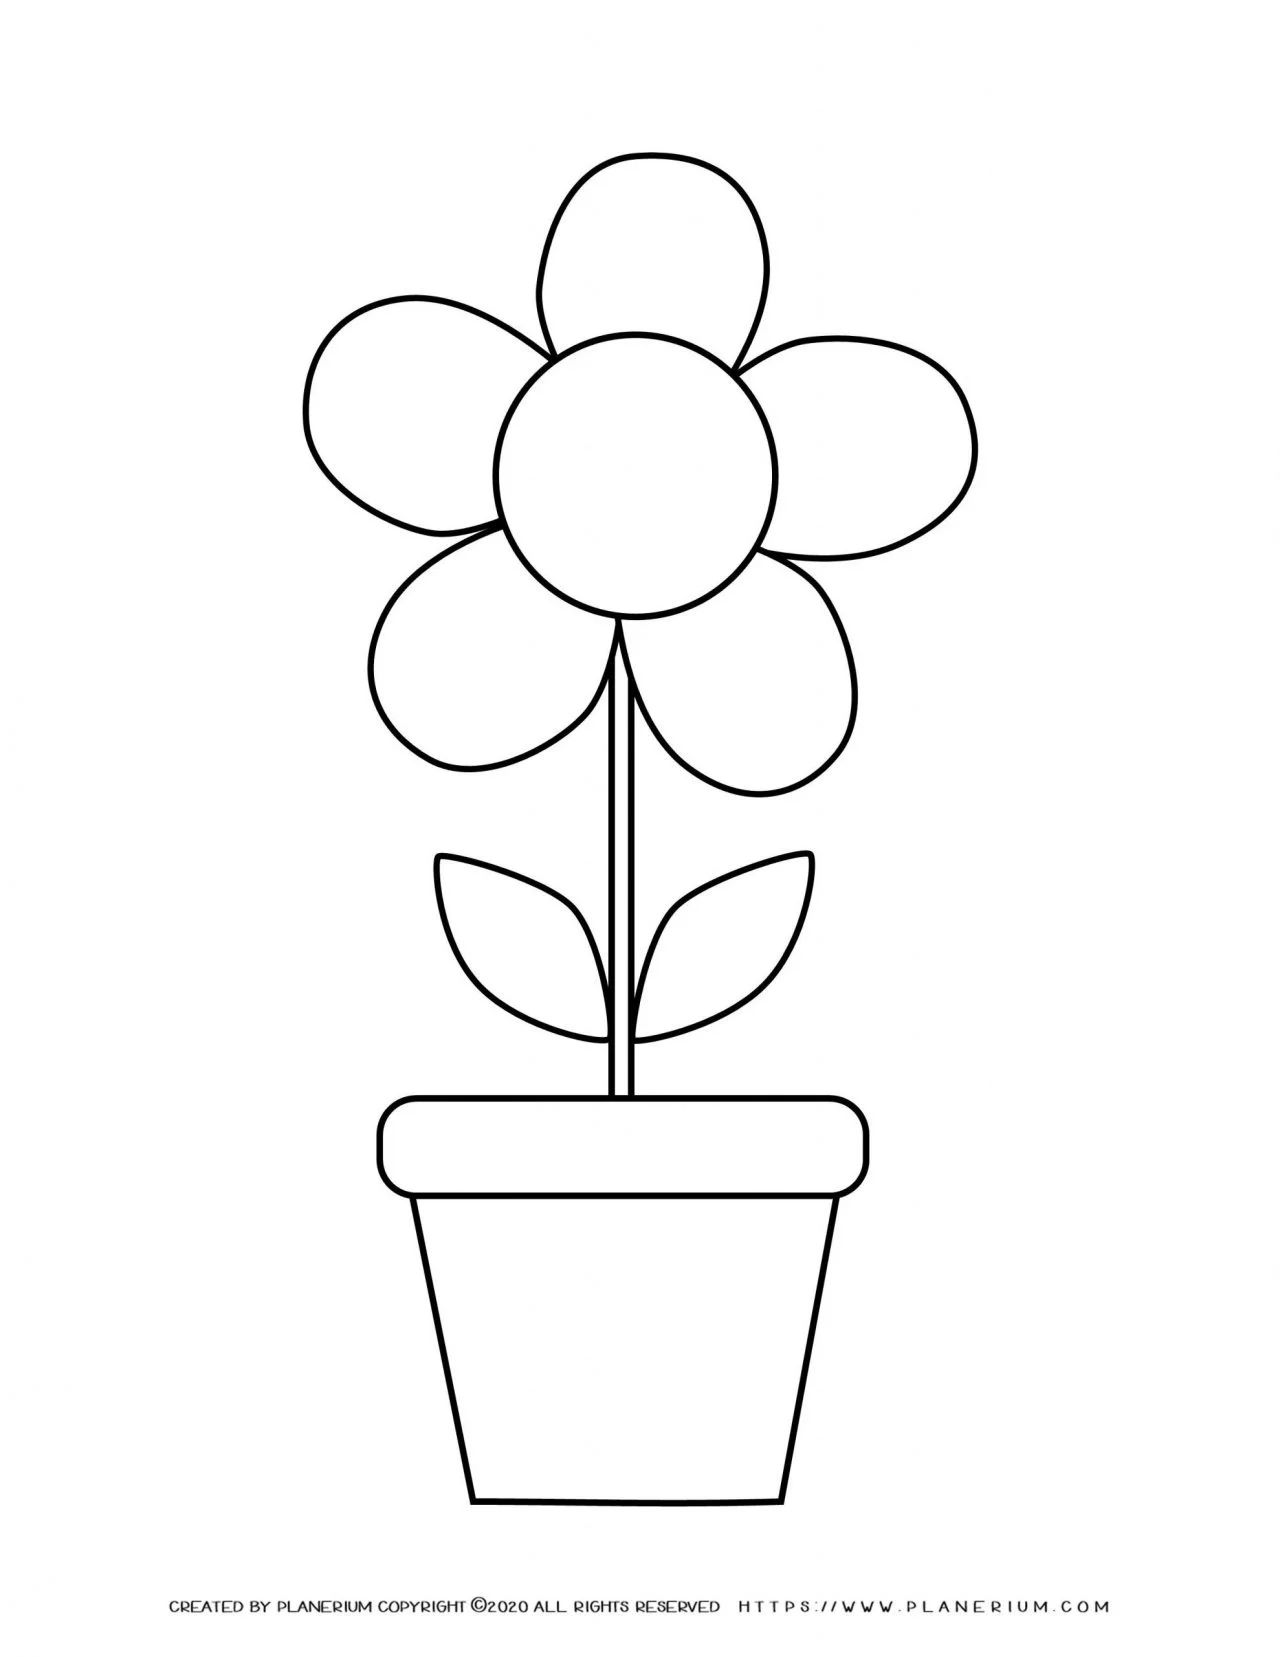 spring-coloring-page-flower-in-a-pot-template-planerium